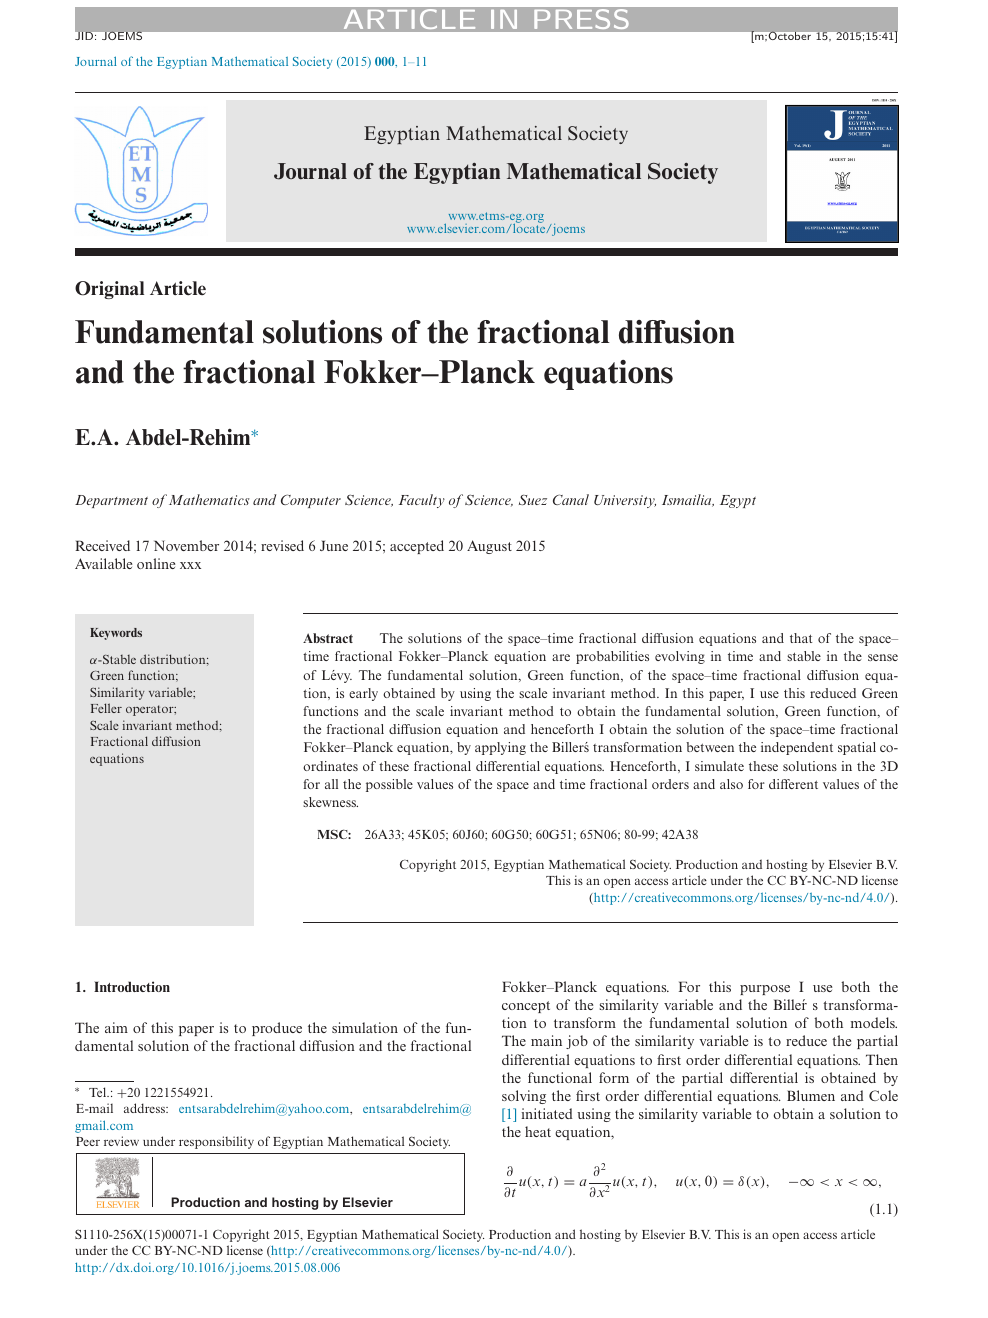 Fundamental Solutions Of The Fractional Diffusion And The Fractional Fokker Planck Equations Topic Of Research Paper In Mathematics Download Scholarly Article Pdf And Read For Free On Cyberleninka Open Science Hub